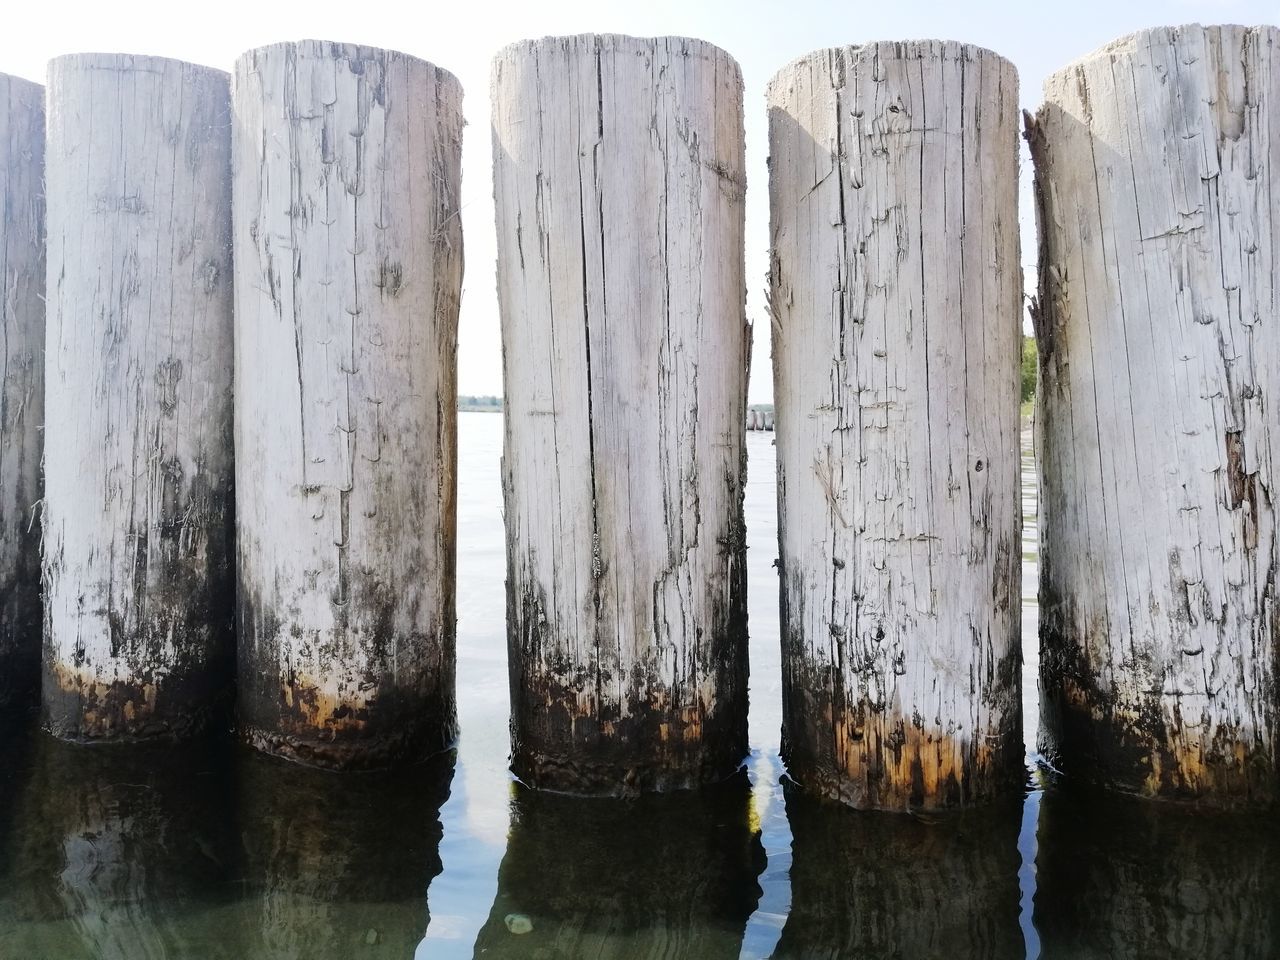 wood - material, no people, water, side by side, in a row, day, nature, outdoors, group of objects, close-up, rock, wooden post, solid, pattern, post, reflection, architecture, rock - object, built structure